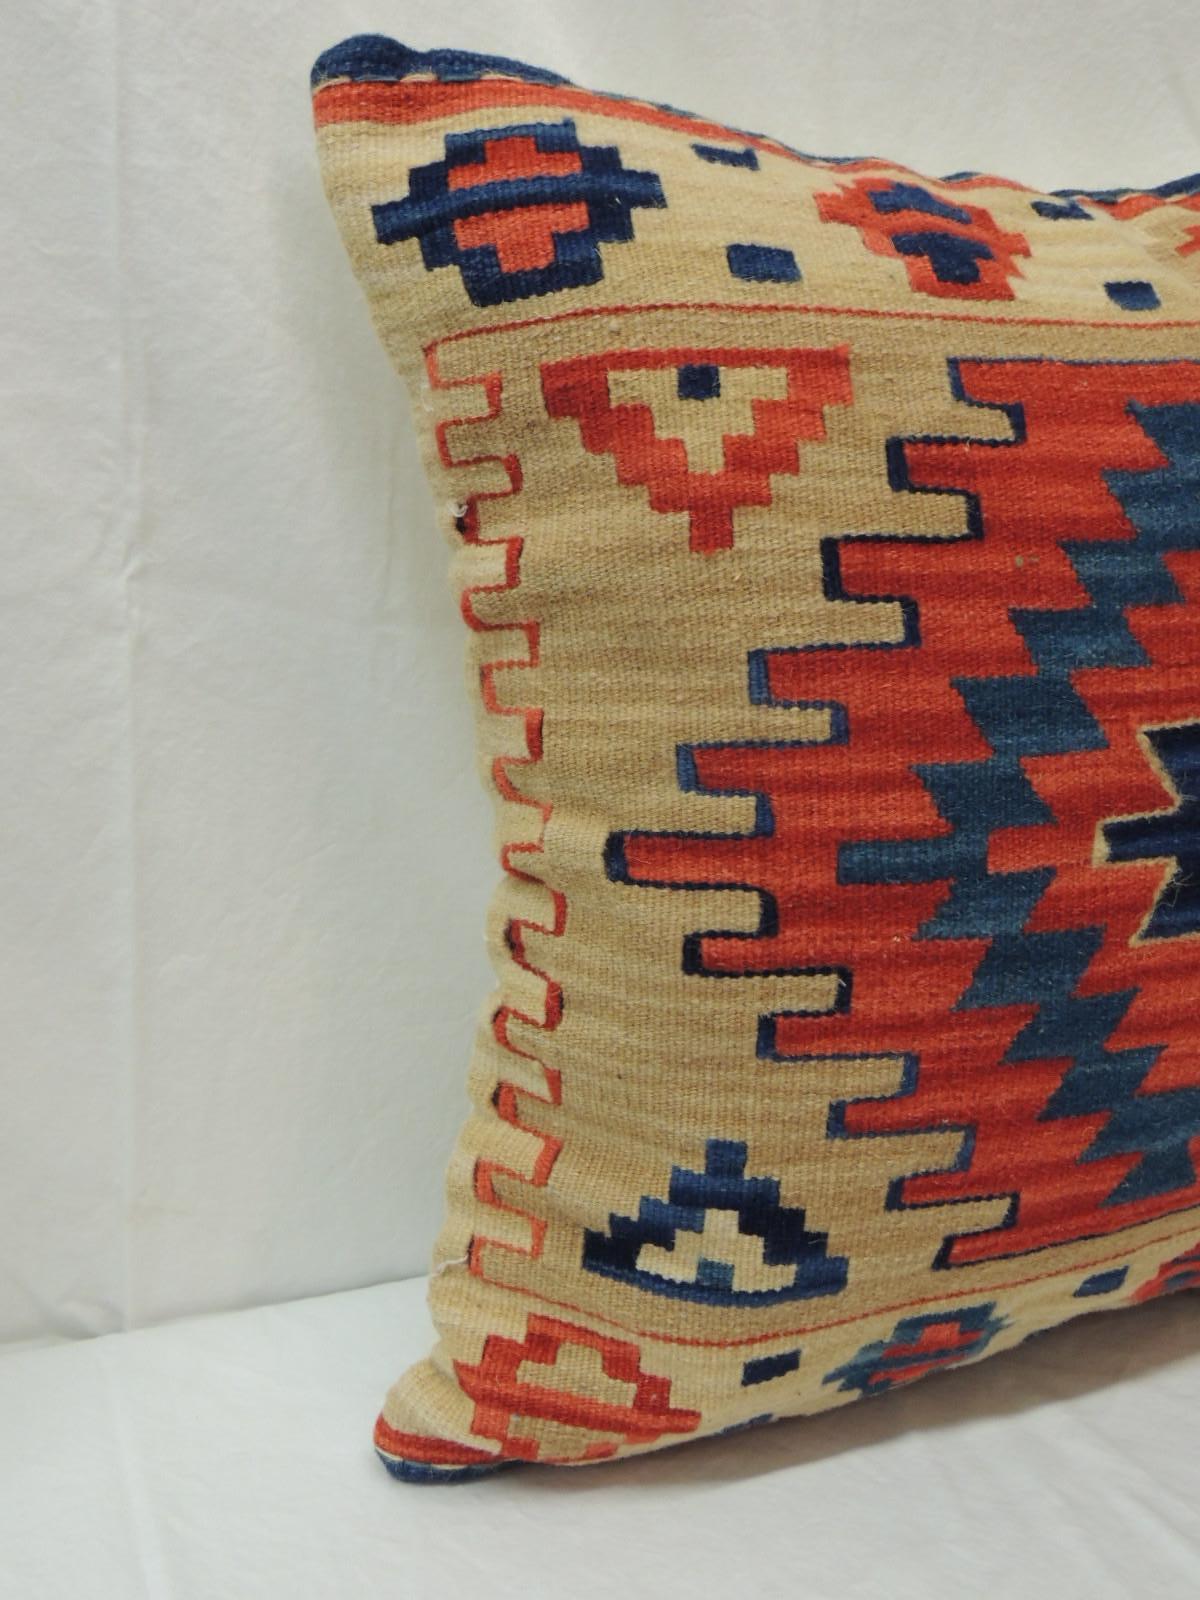 Vintage orange and blue Kilim decorative pillow.
Natural cotton backing and zipper closure.
Feather/down insert.
From George Smith shop in Soho, circa 1990s.
Size: 19.5